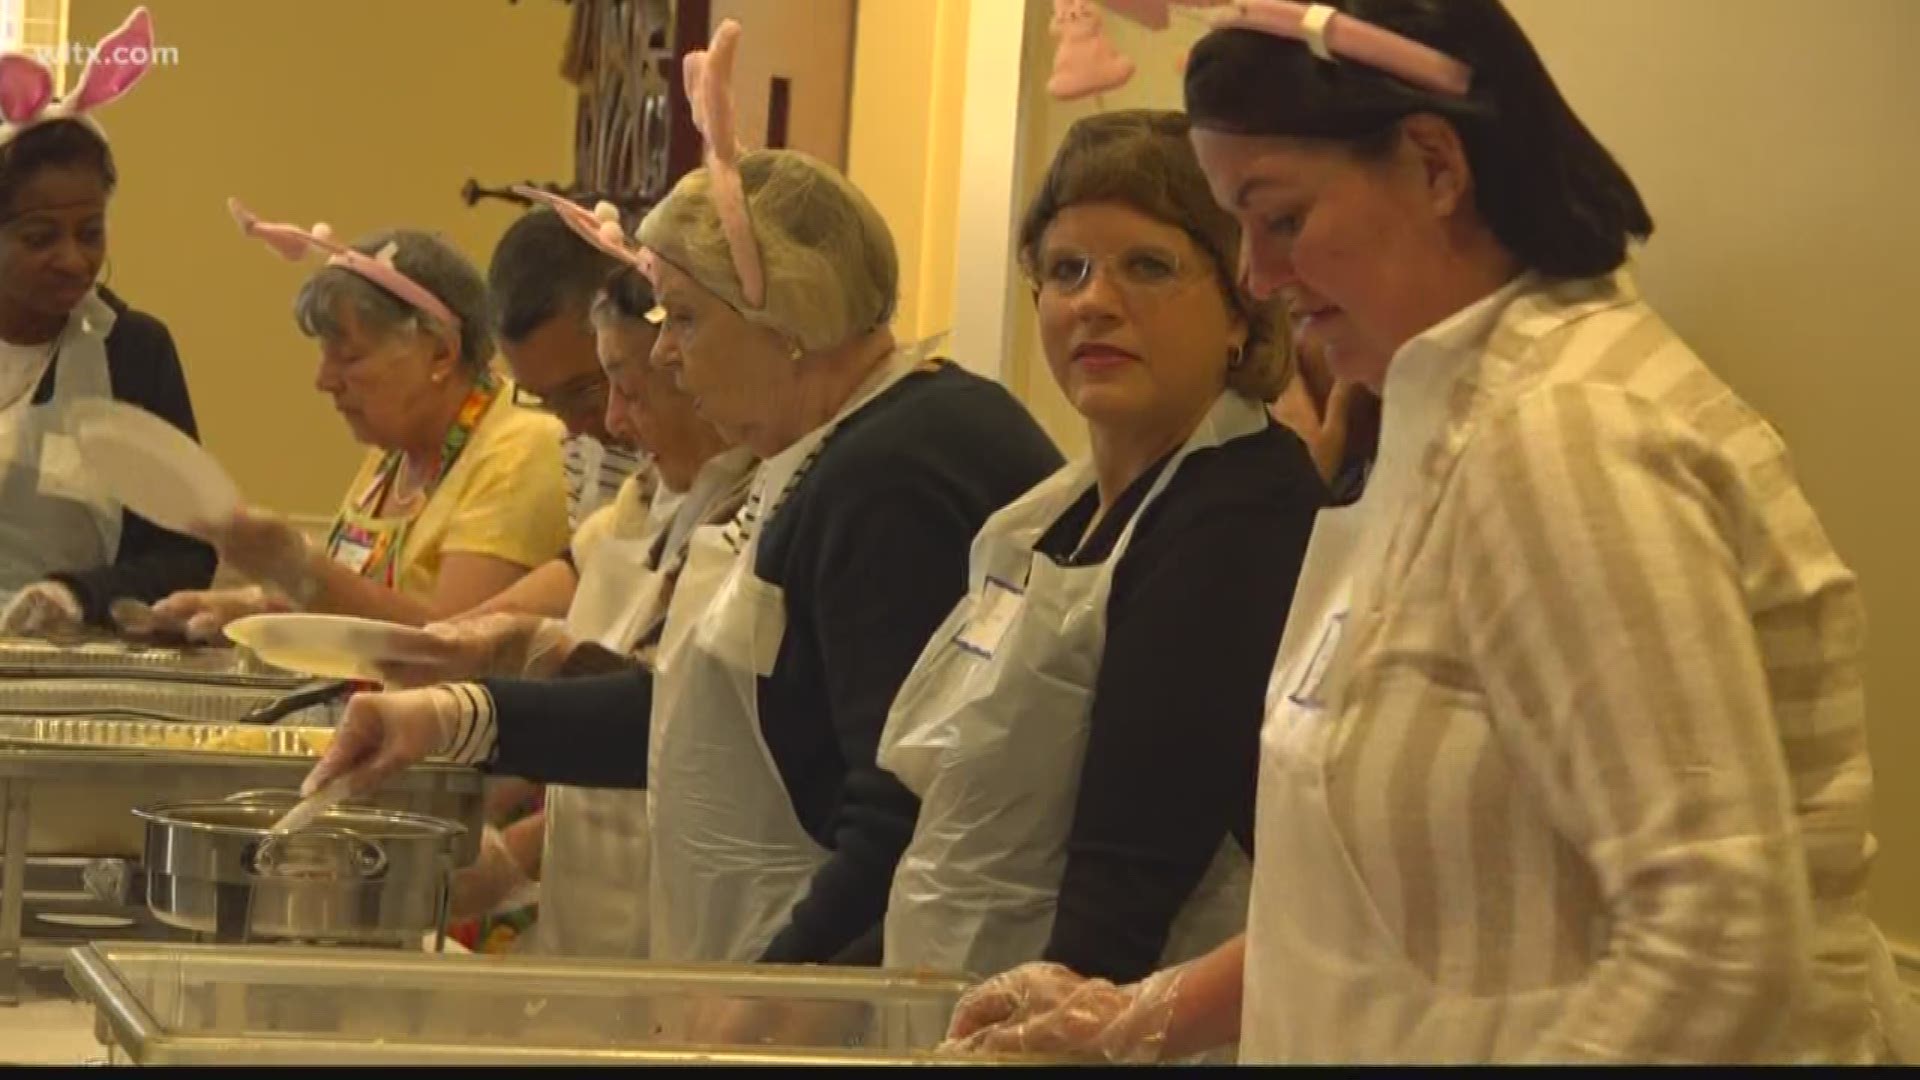 On Easter, St. Peter's Catholic Church held a lunch to feed those in need.